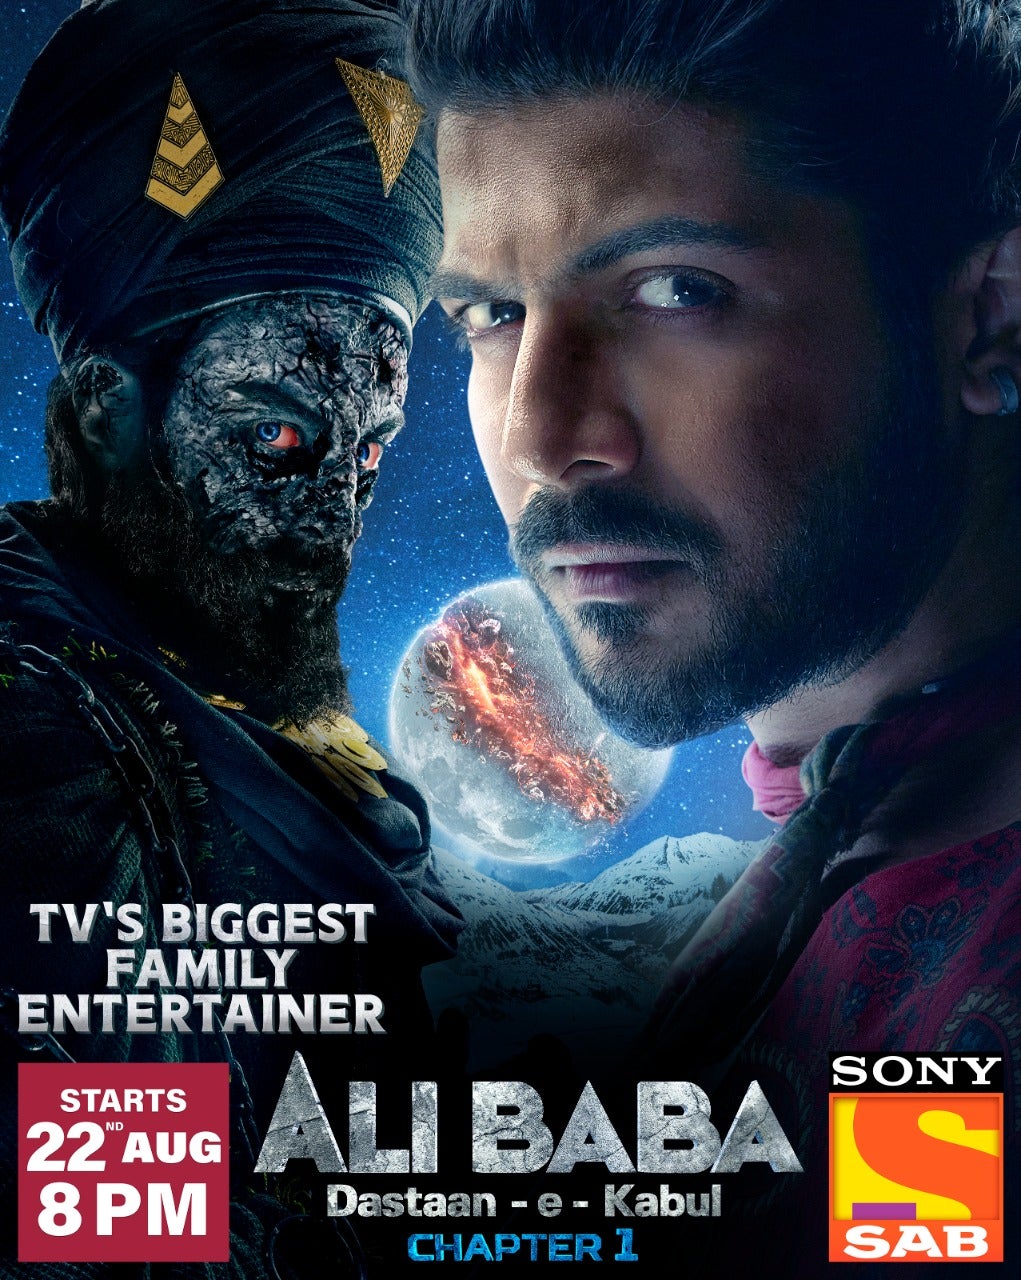 TV ratings for Alibaba: Dastaan-E-Kabul in Brazil. Sony SAB TV series